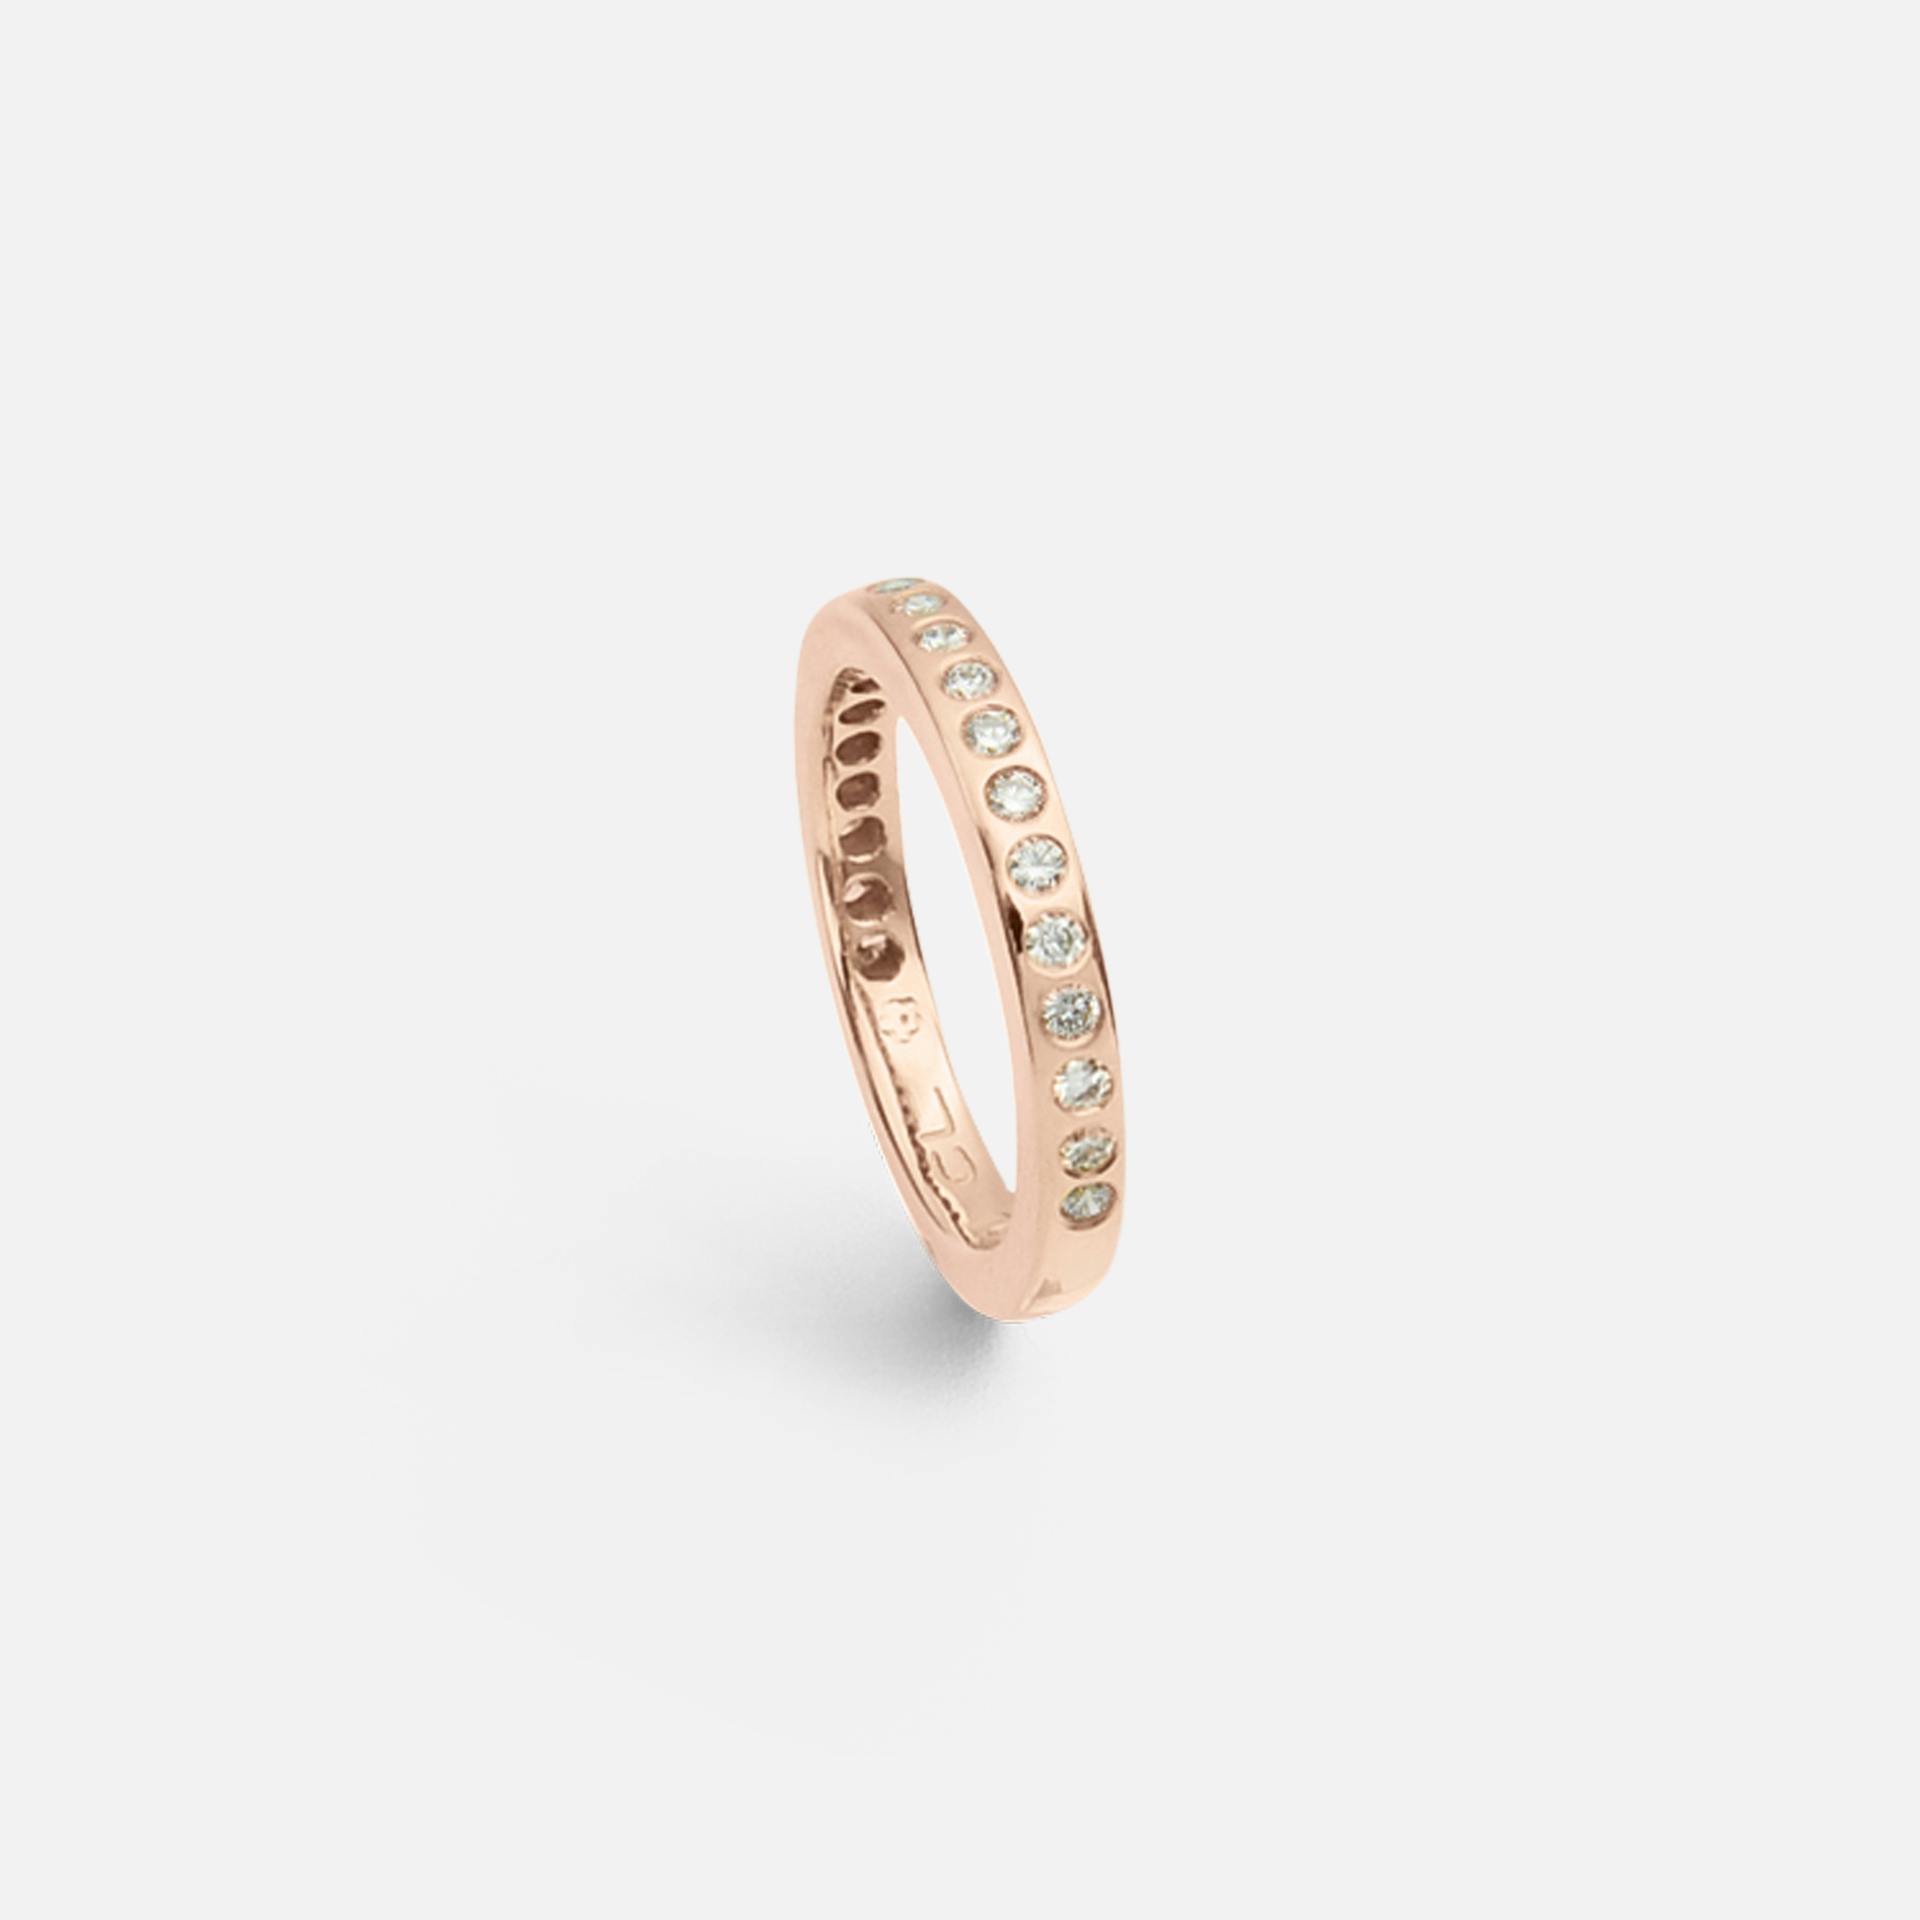 Forever Love ring 18k polished rose gold with diamonds 0.38-0.46 ct. TW. VS.